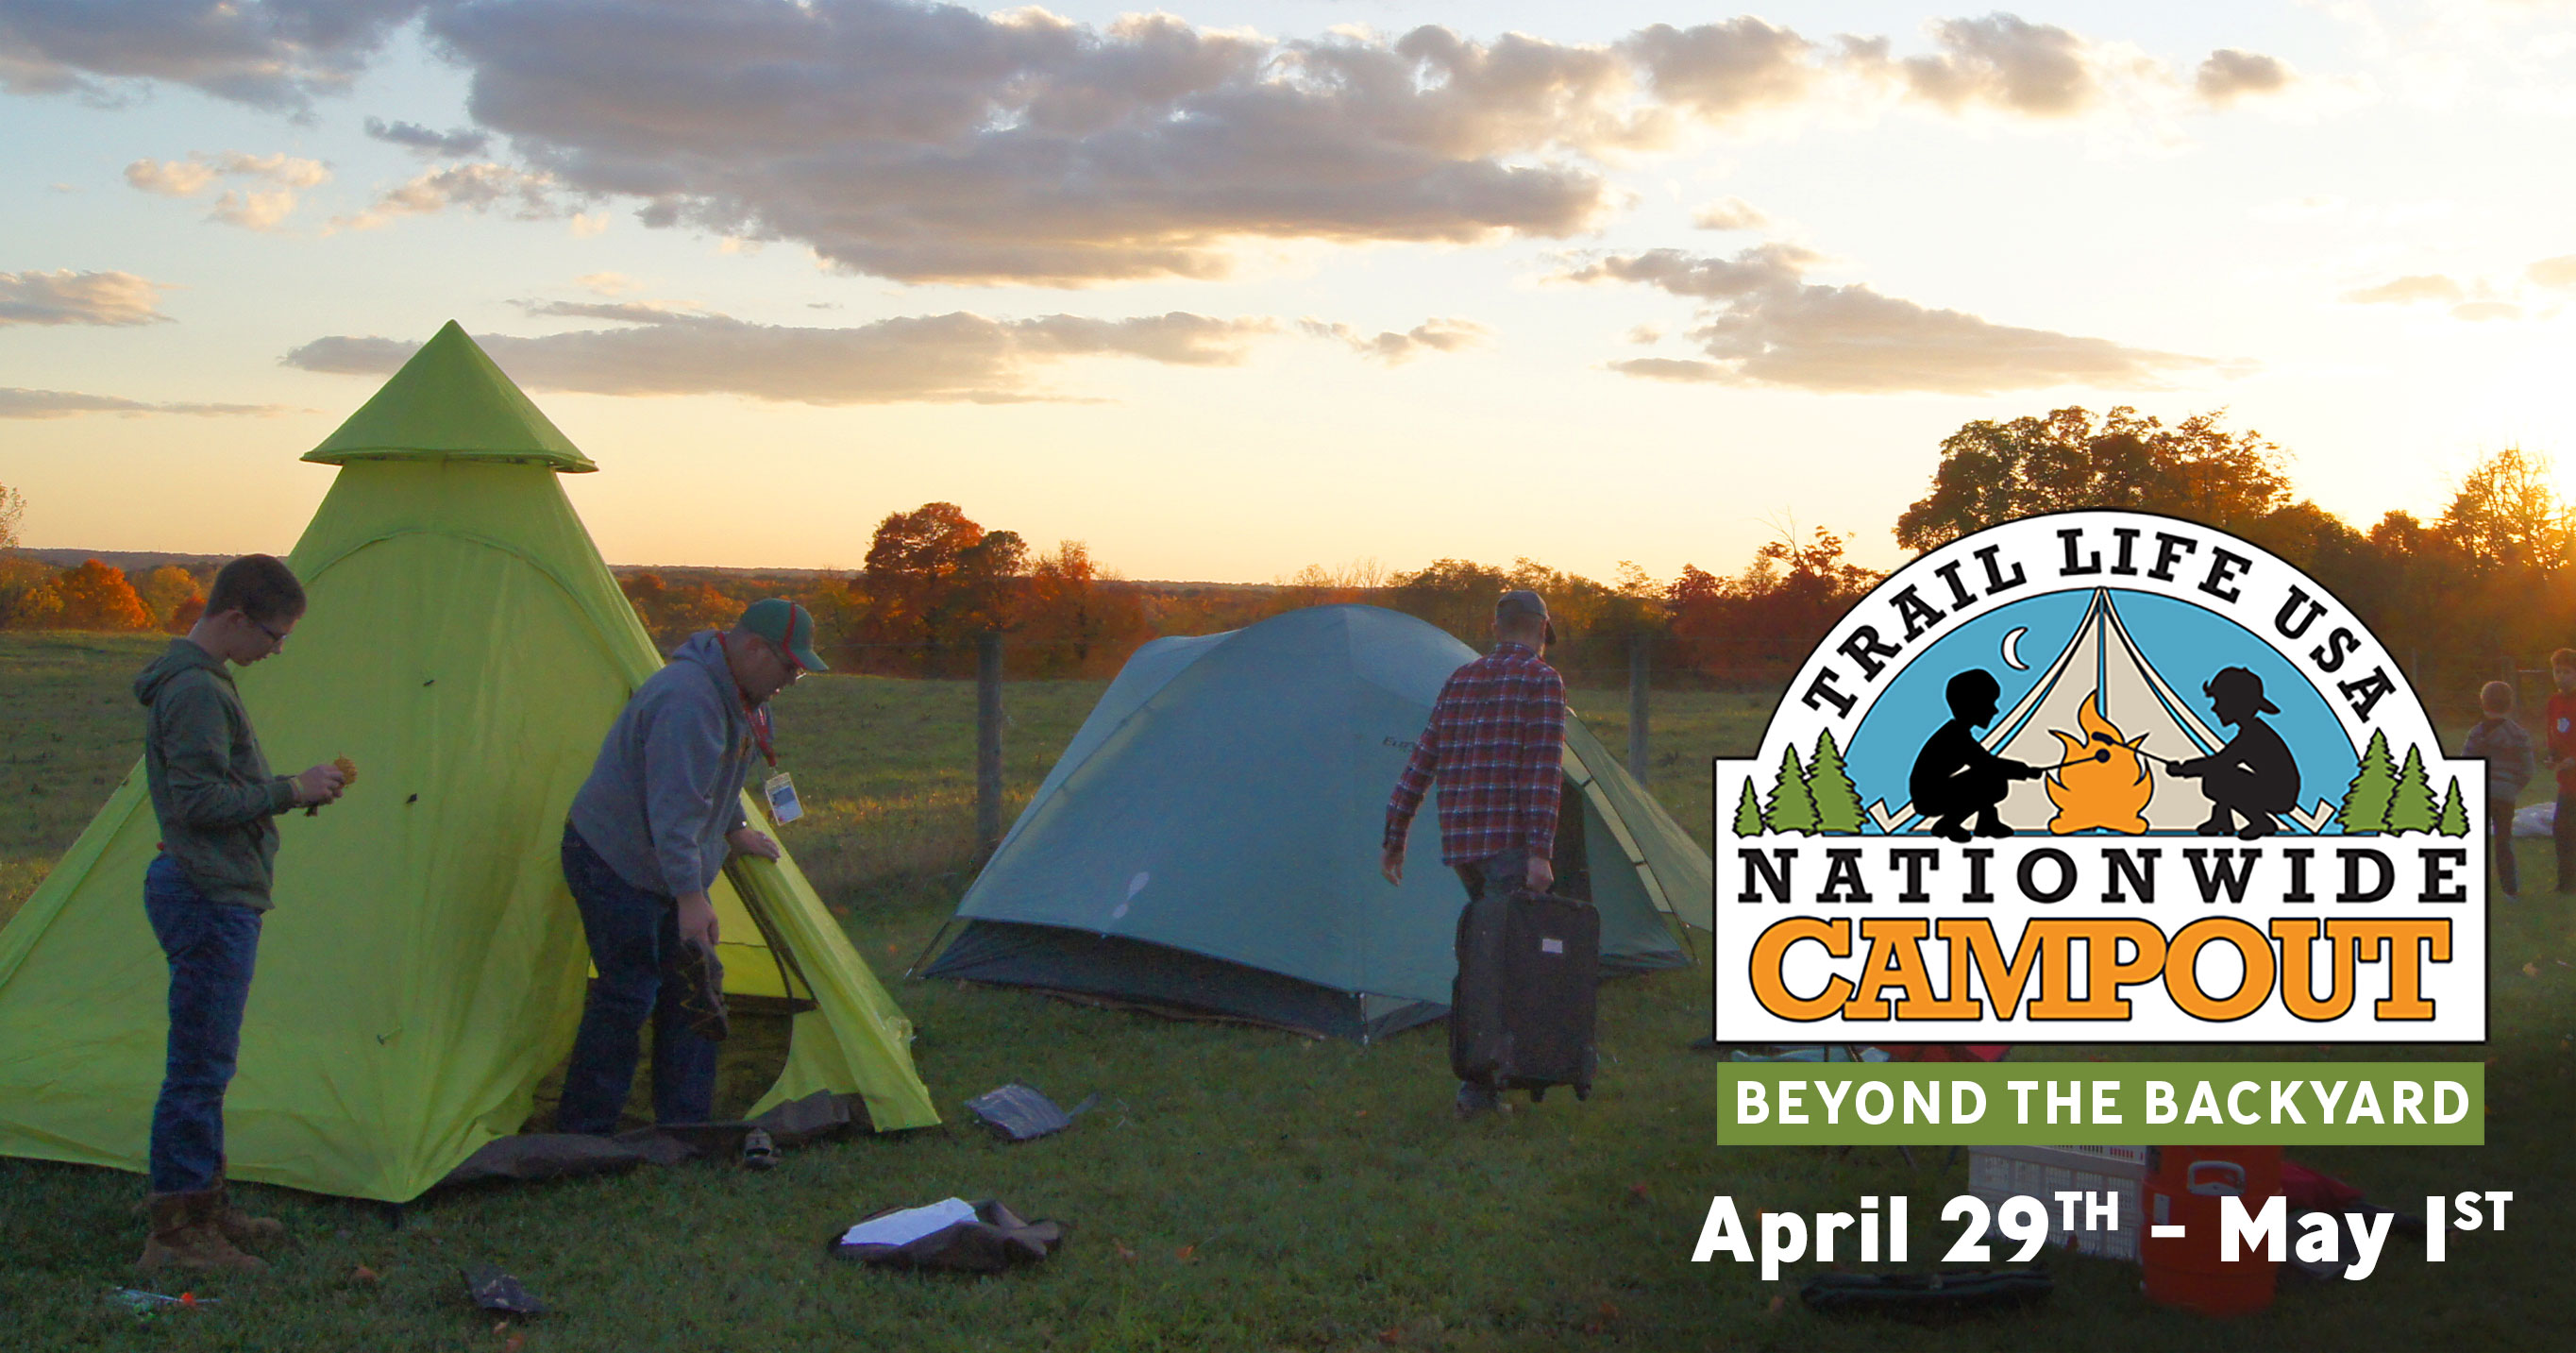 Trail Life USA Nationwide Campout